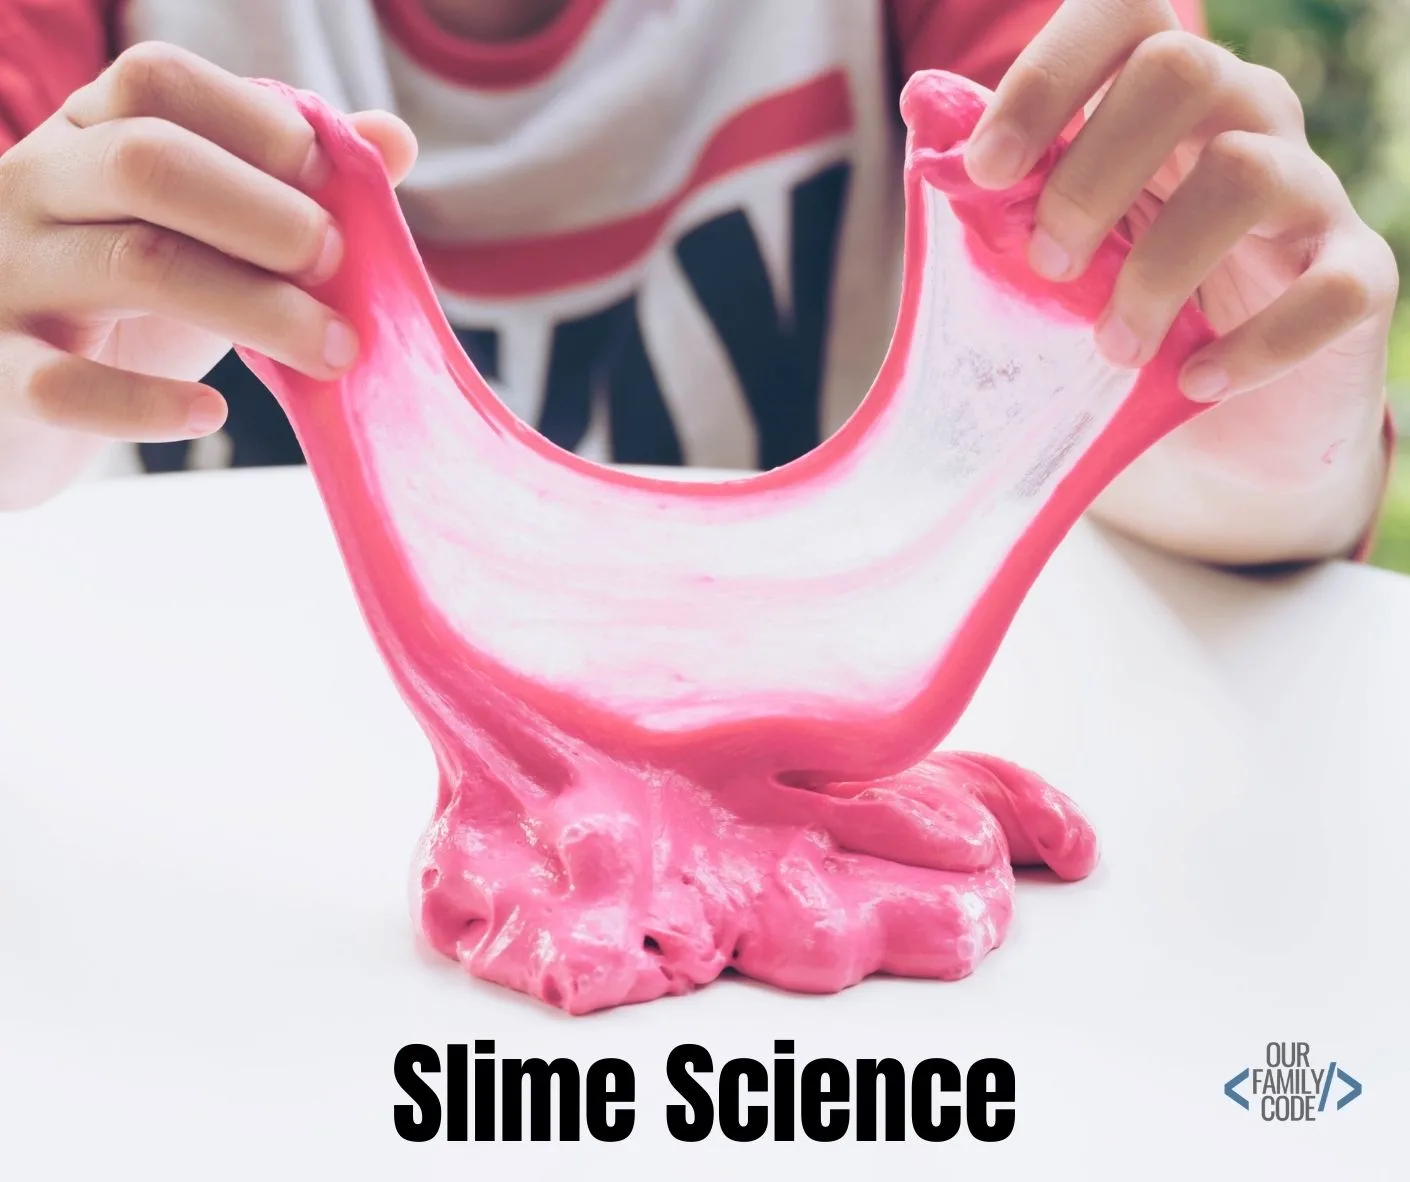 A picture of a kid stretching pink slime with the text "slime science" in black.